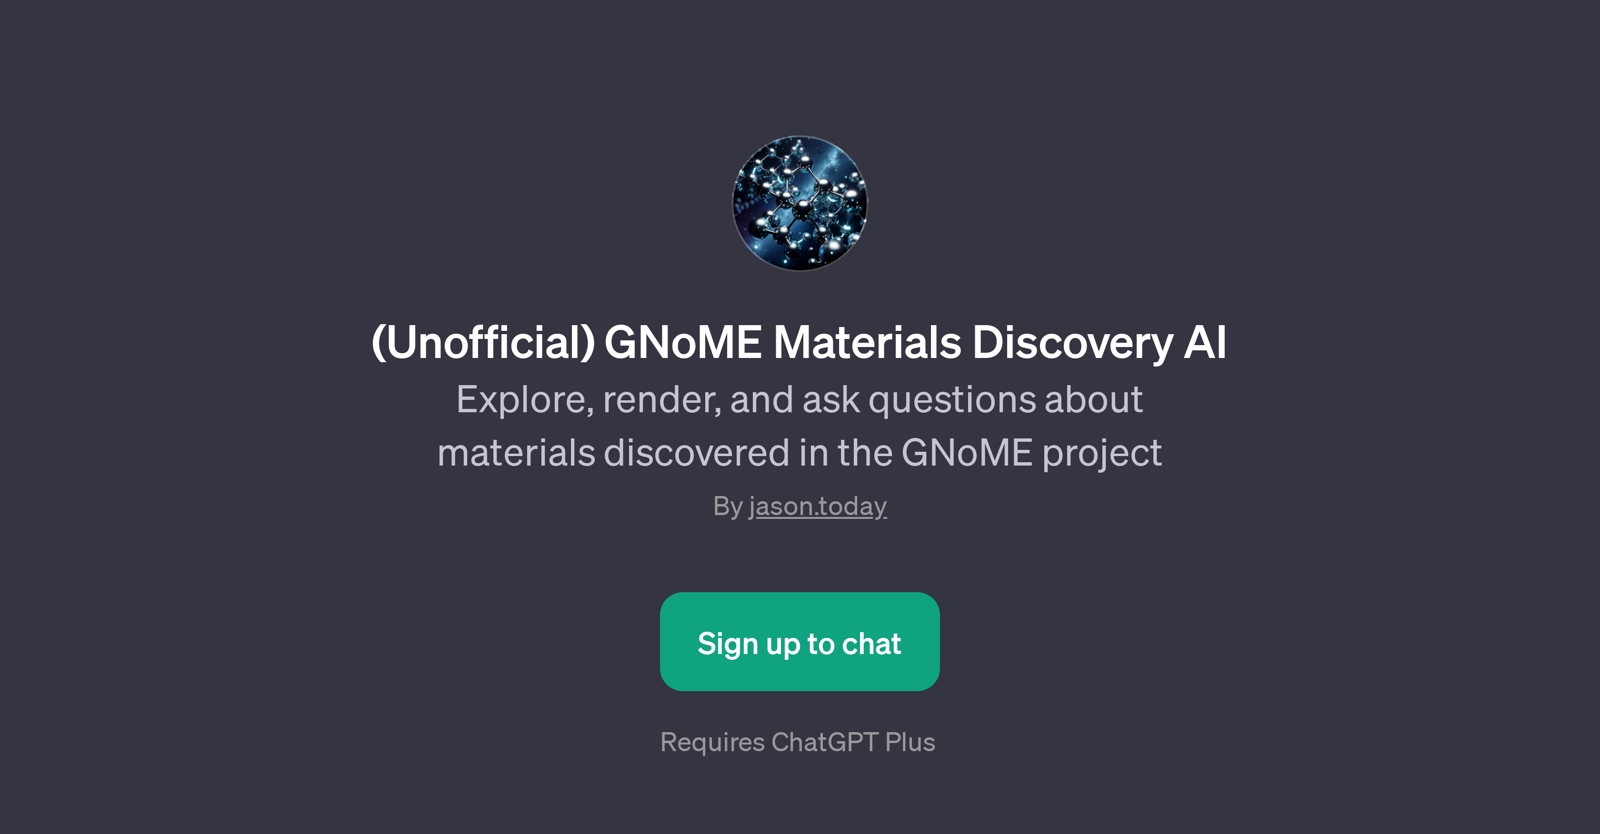 (Unofficial) GNoME Materials Discovery AI website